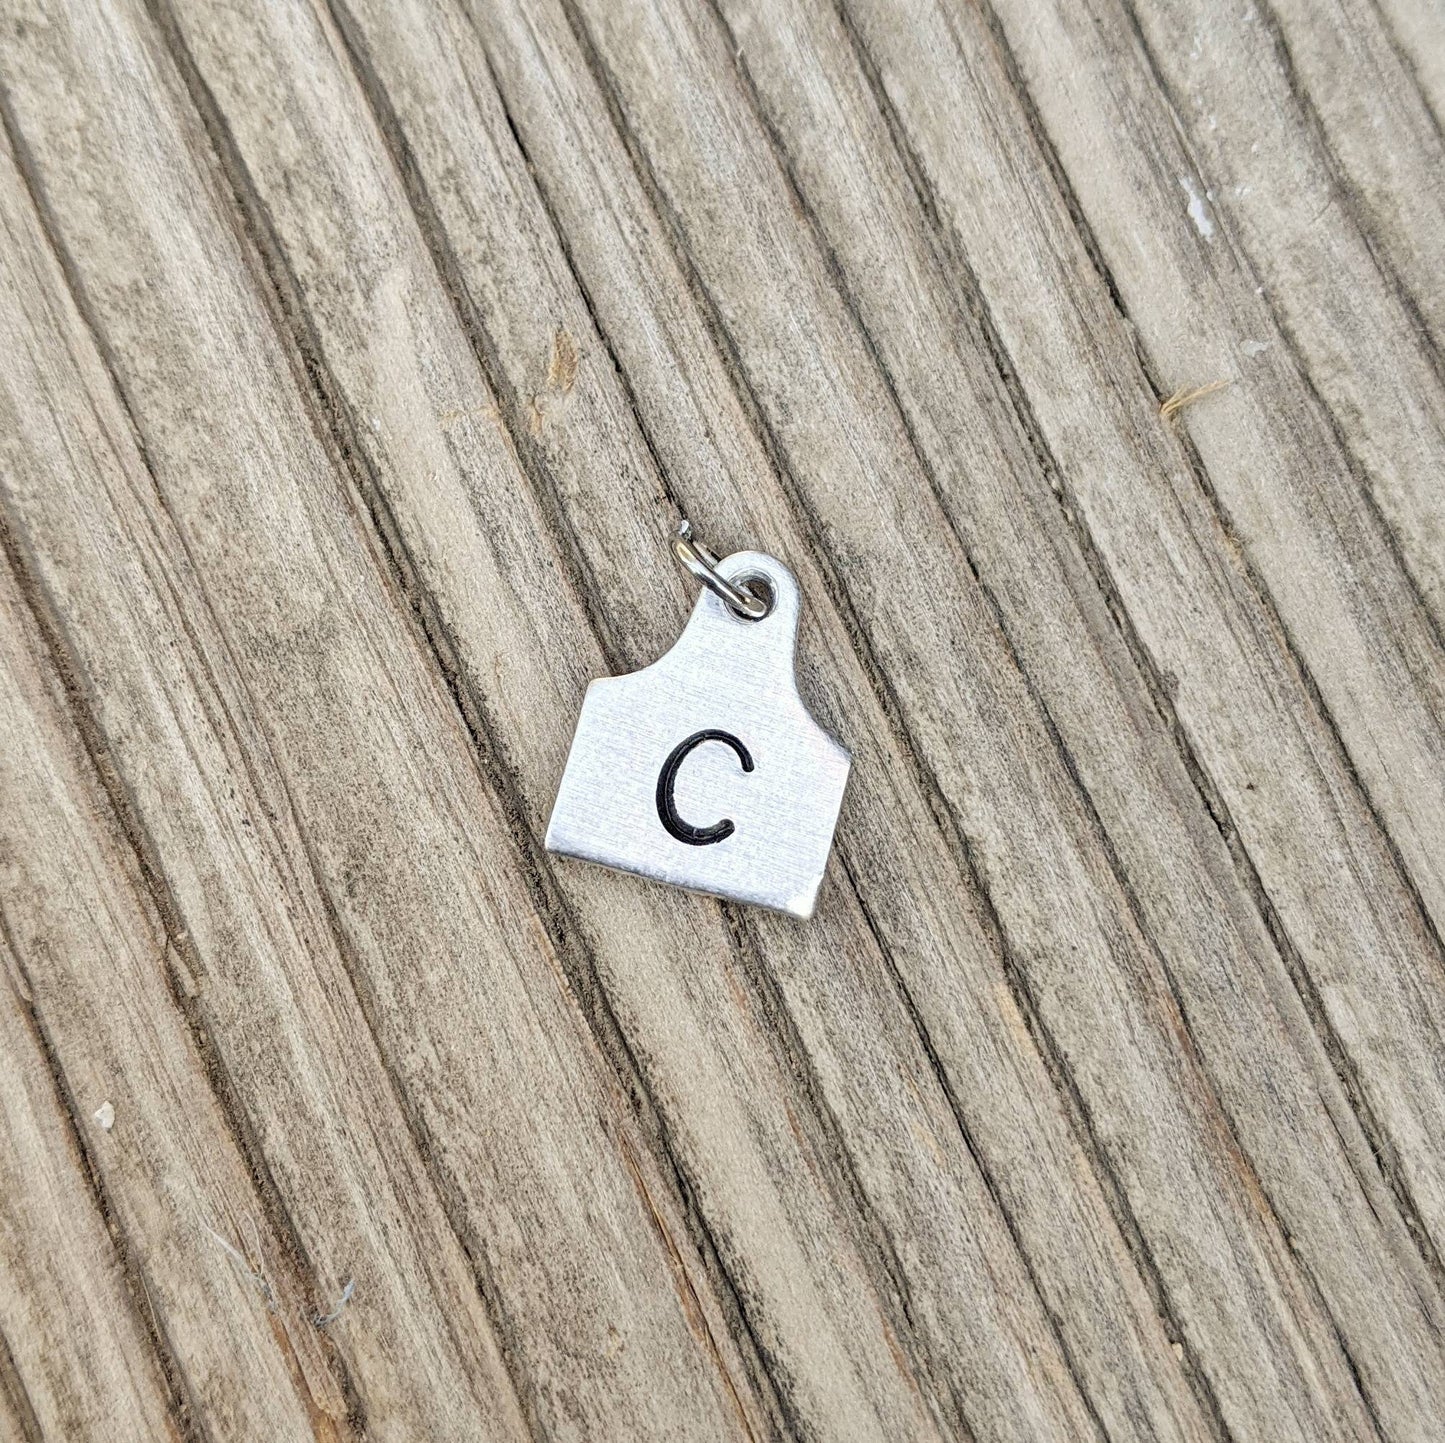 Initial Cattle Ear Tag Charm